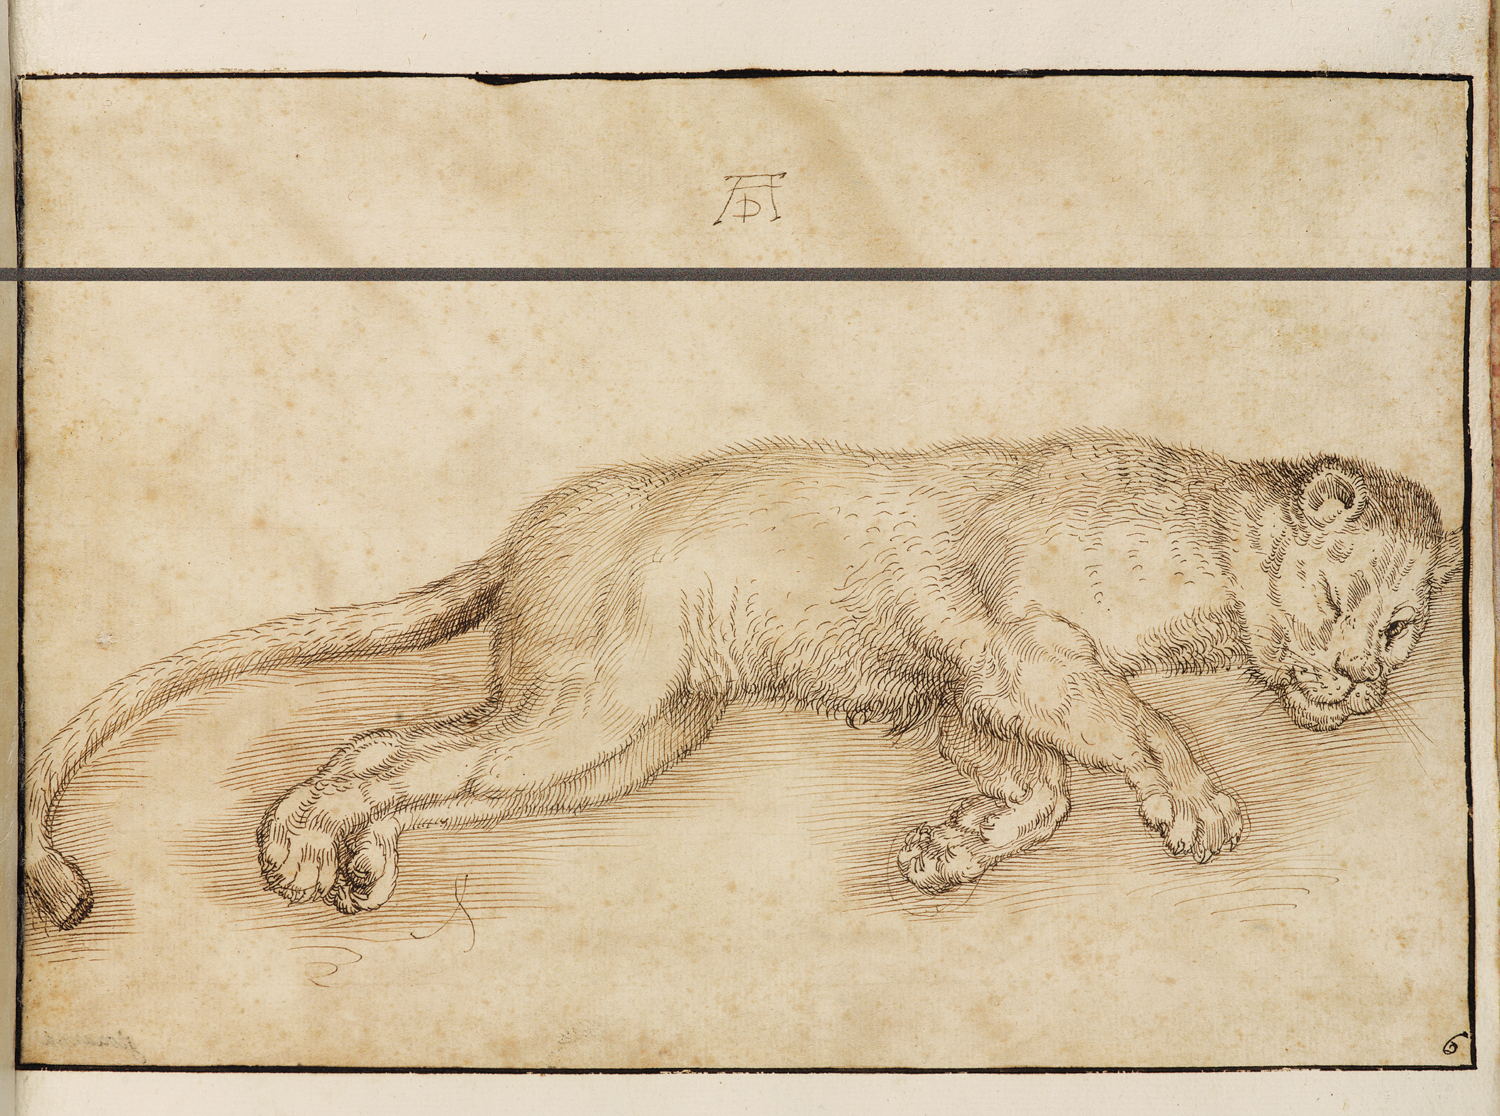 Lioness with an Open Eye by Giovanna Garzoni - circa 1639 - 18.2 x 26.8 cm Accademia Nazionale di San Luca